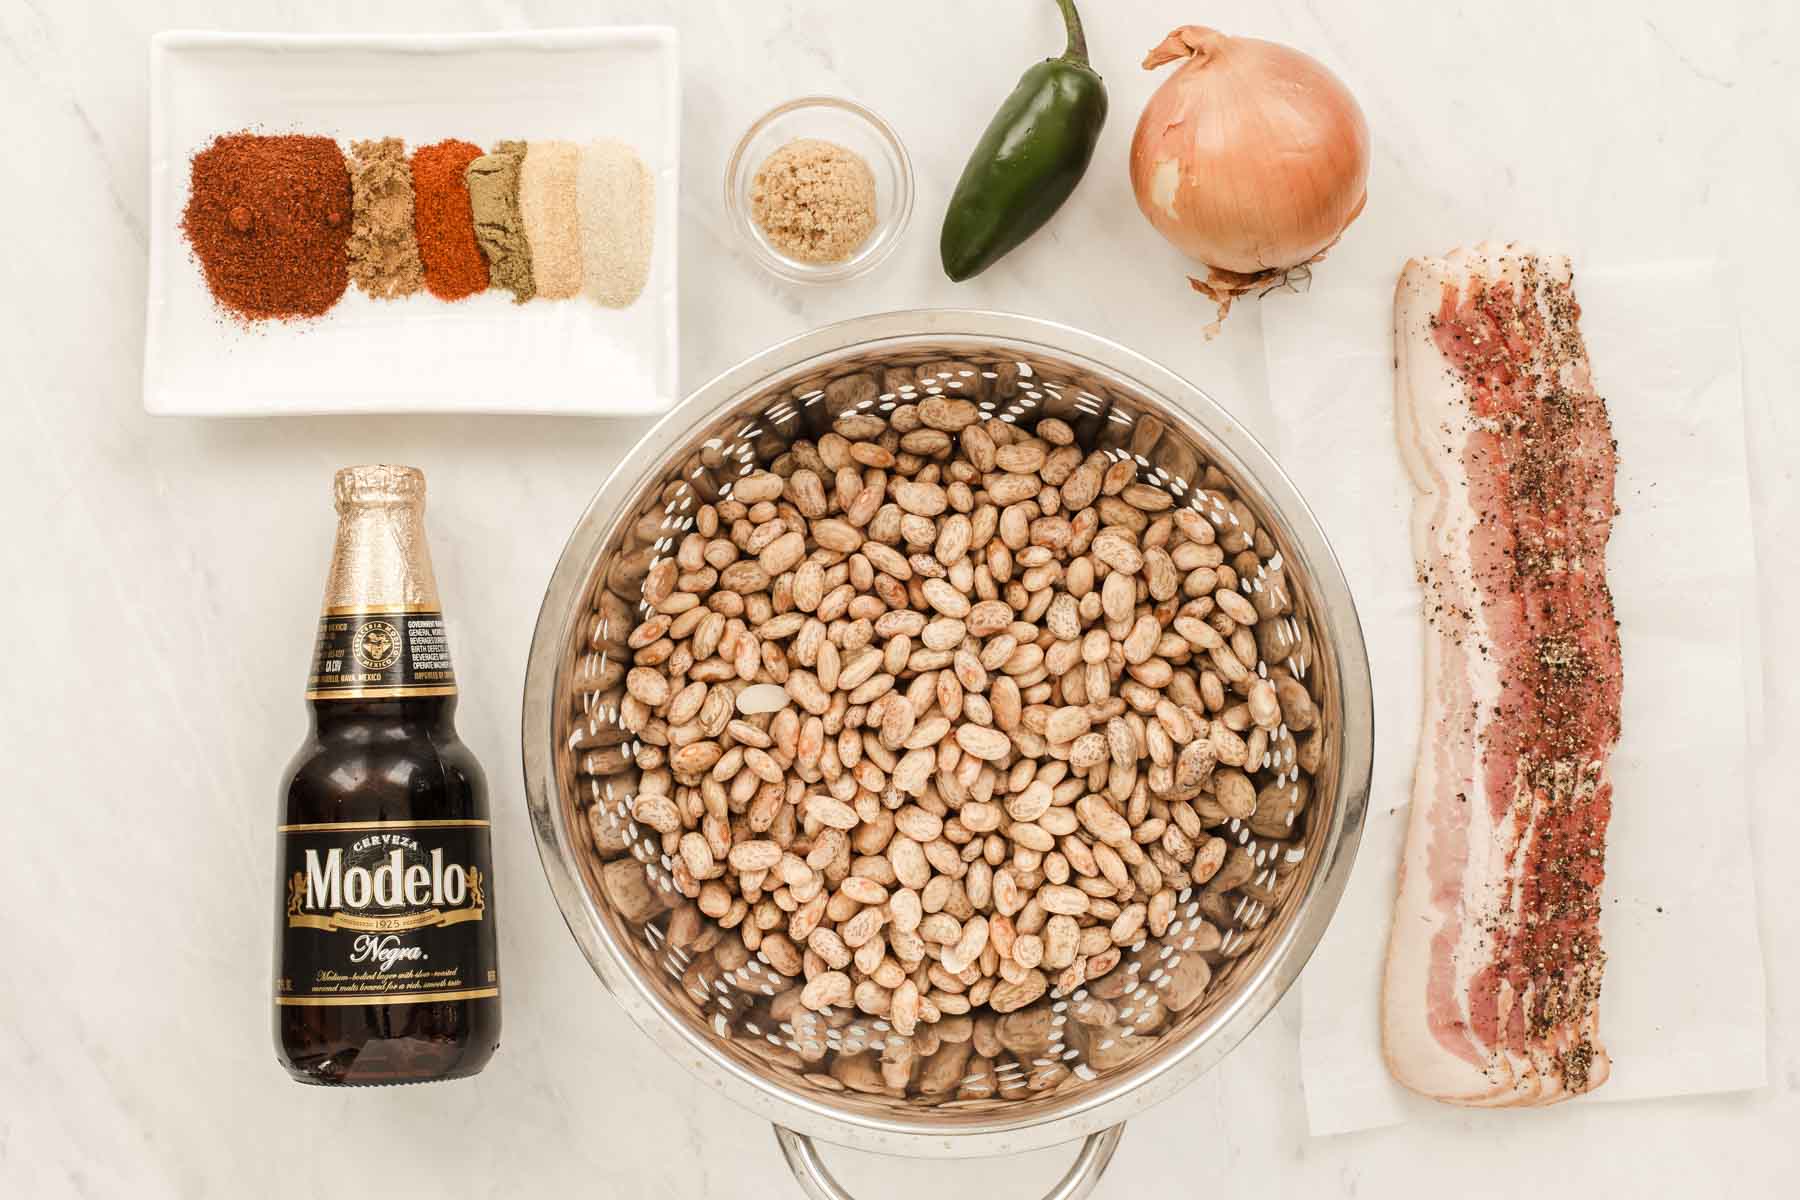 Bowl of soaked pinto beans, bottle of beer, spices and bacon on white table.